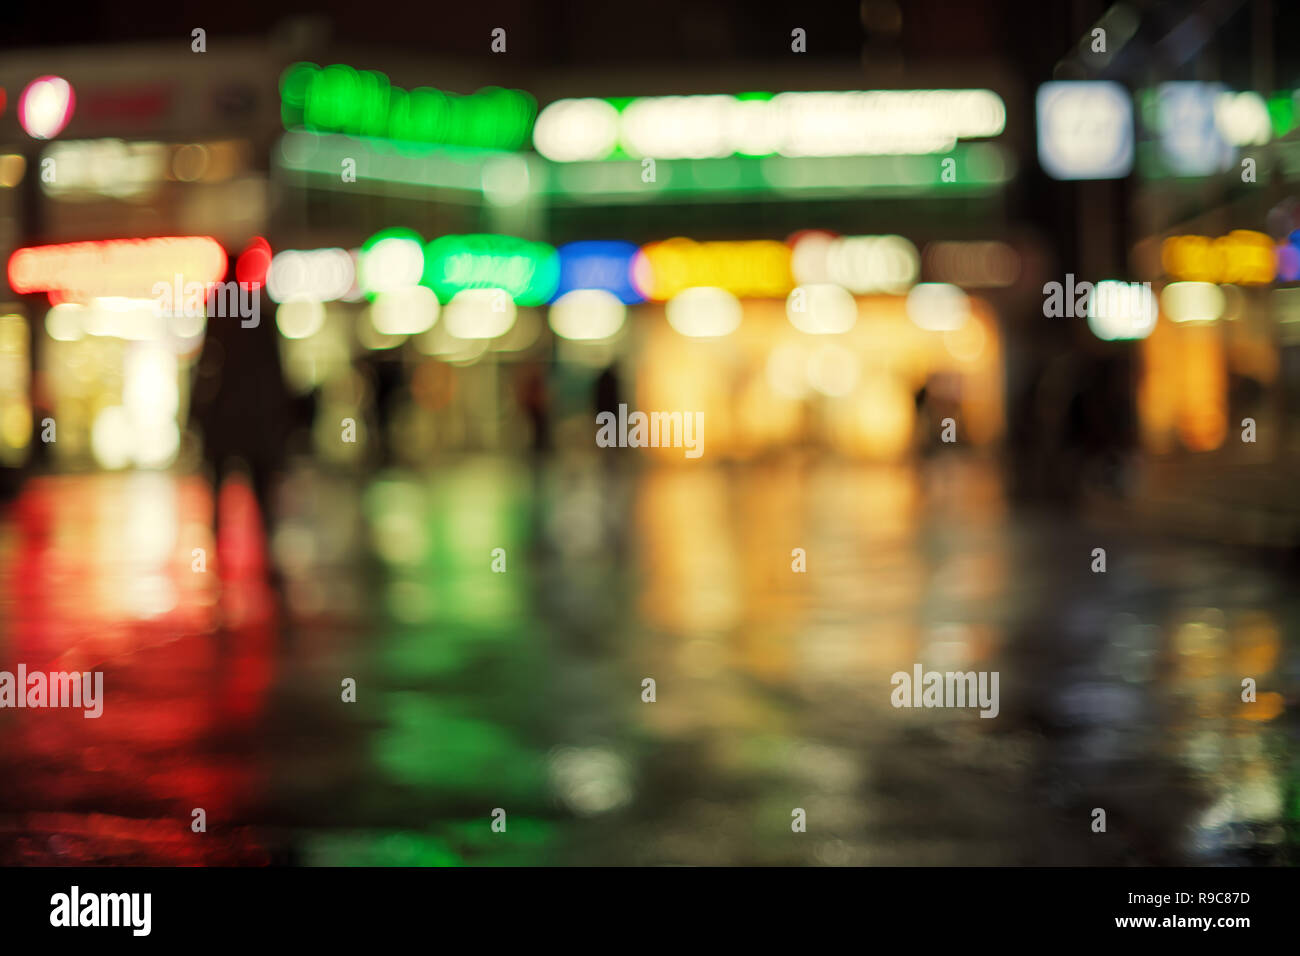 Distant defocused shops windows and their reflections into wet pavement. Abstract blurred background Stock Photo